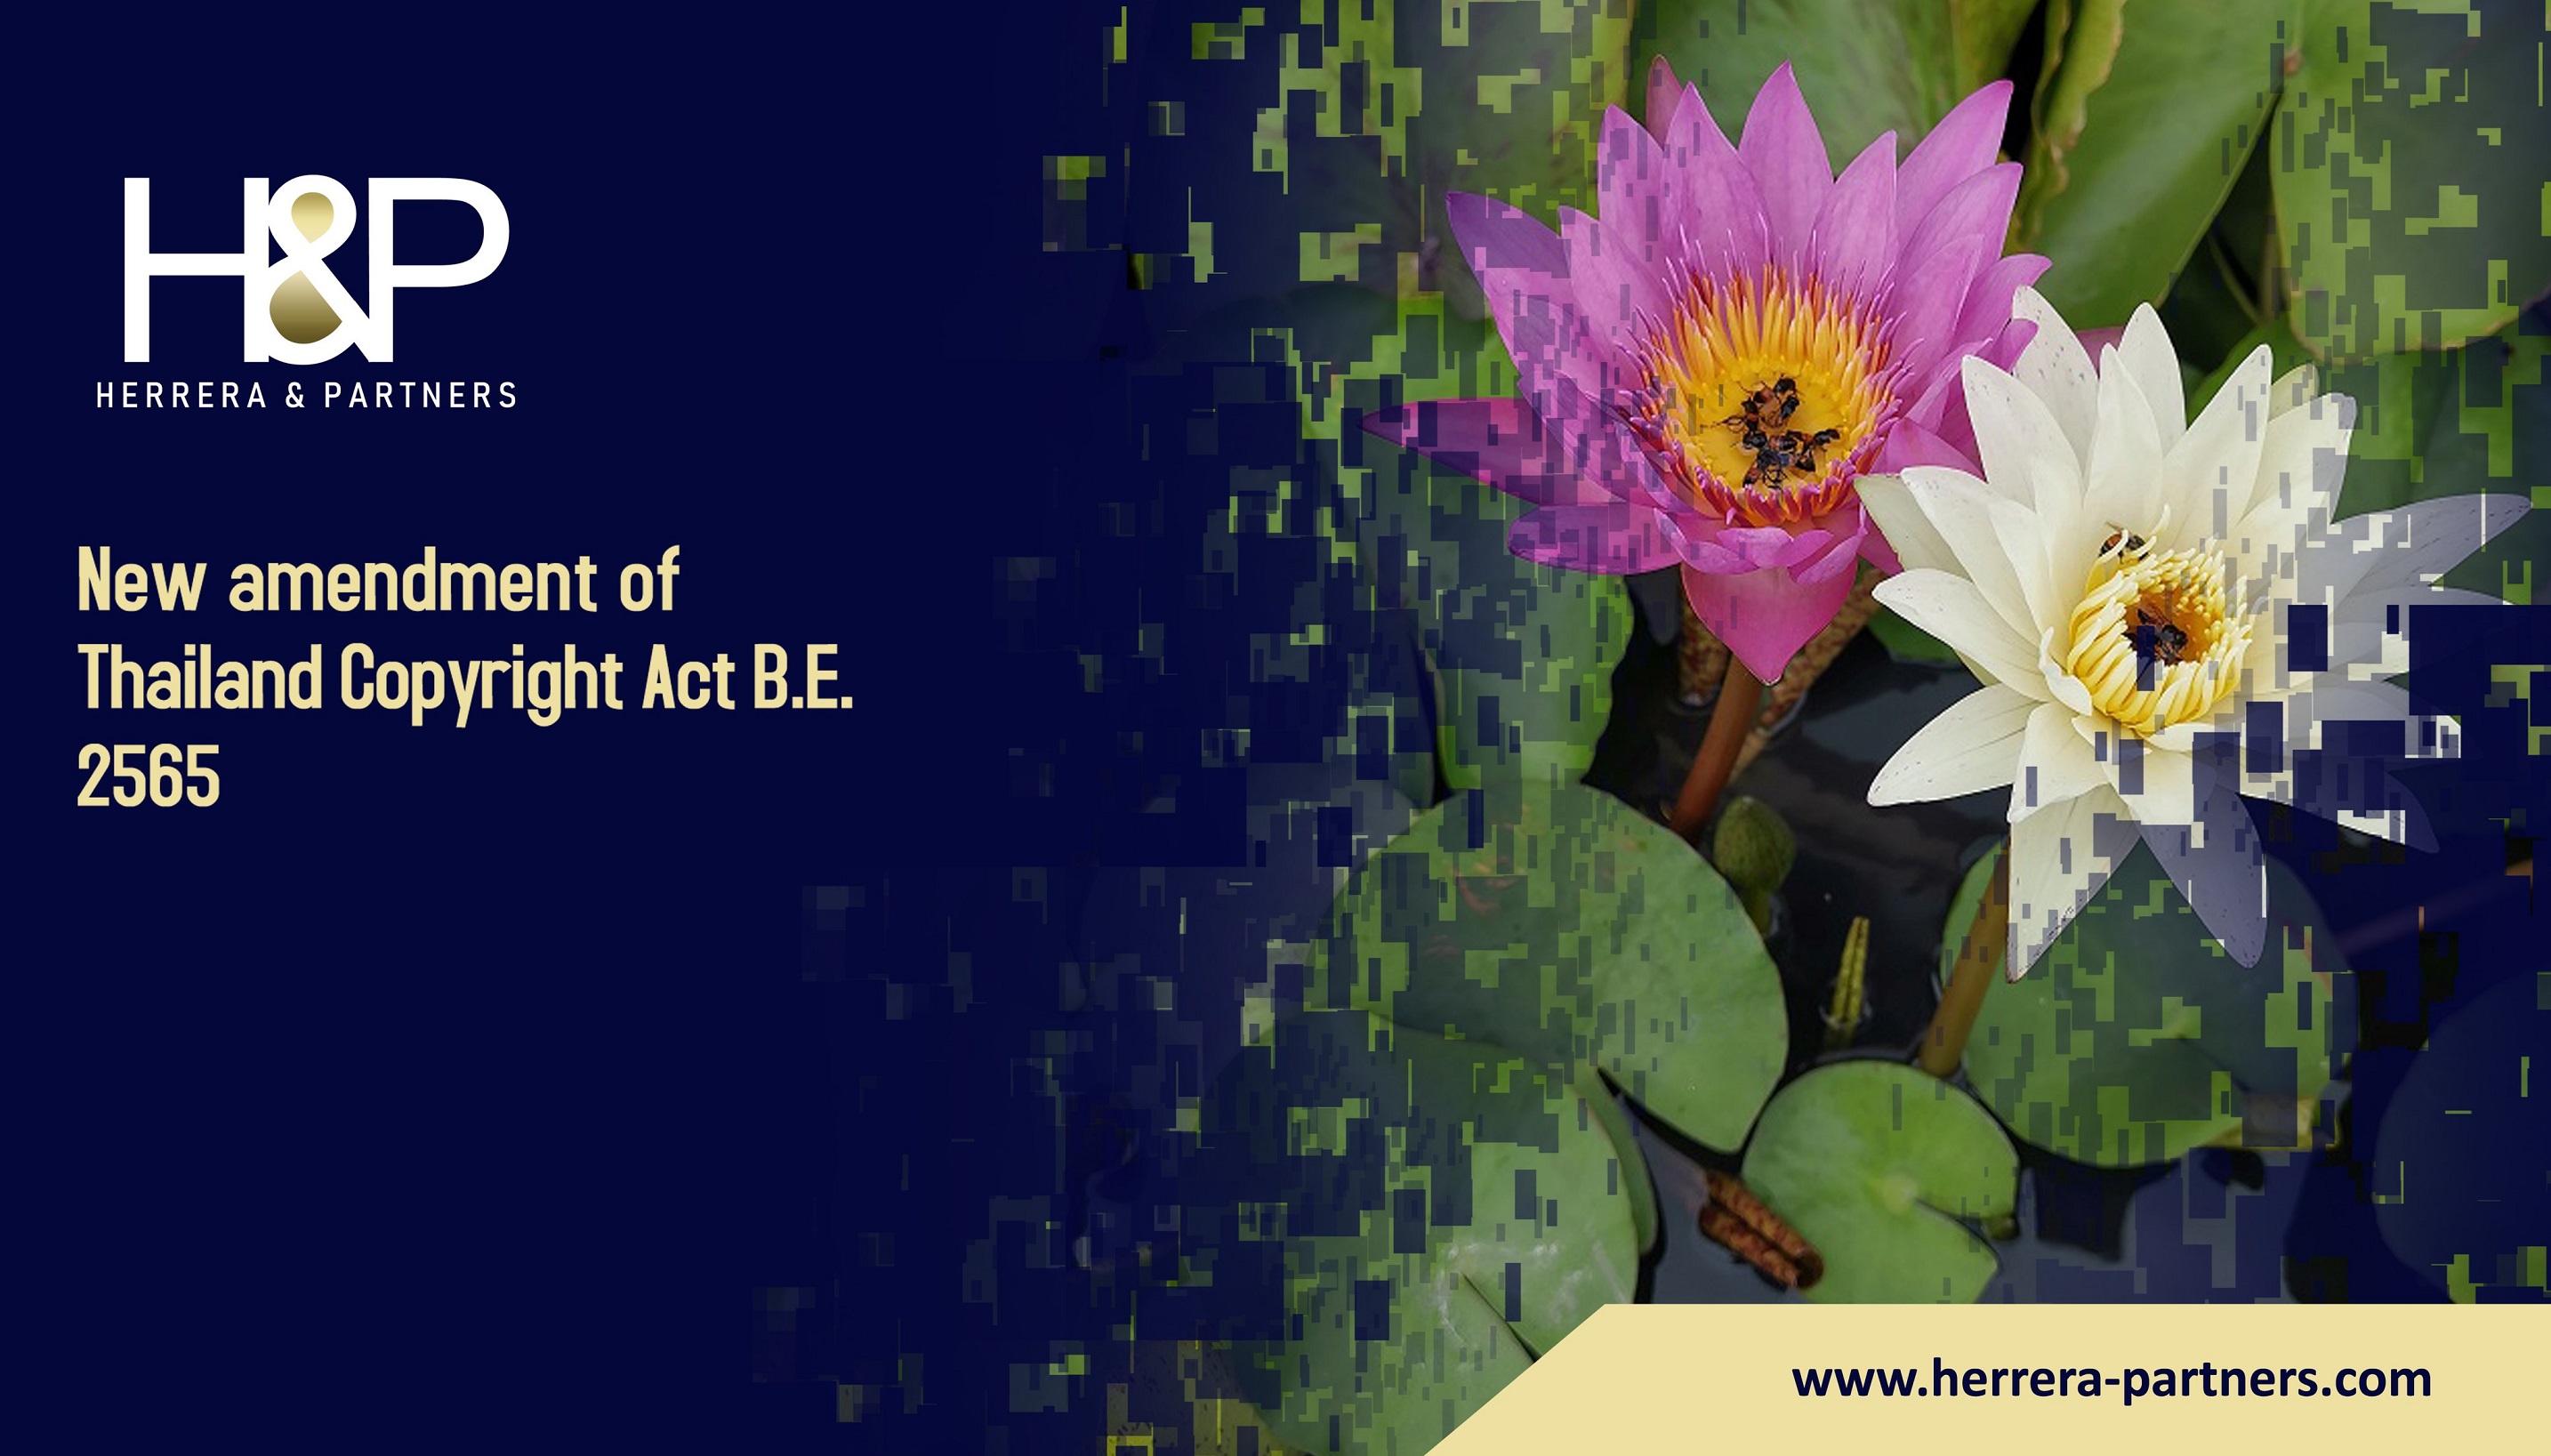 New amendment of Thailand Copyright Act B.E. 2565 H&P Leading corporate law firm in Thailand